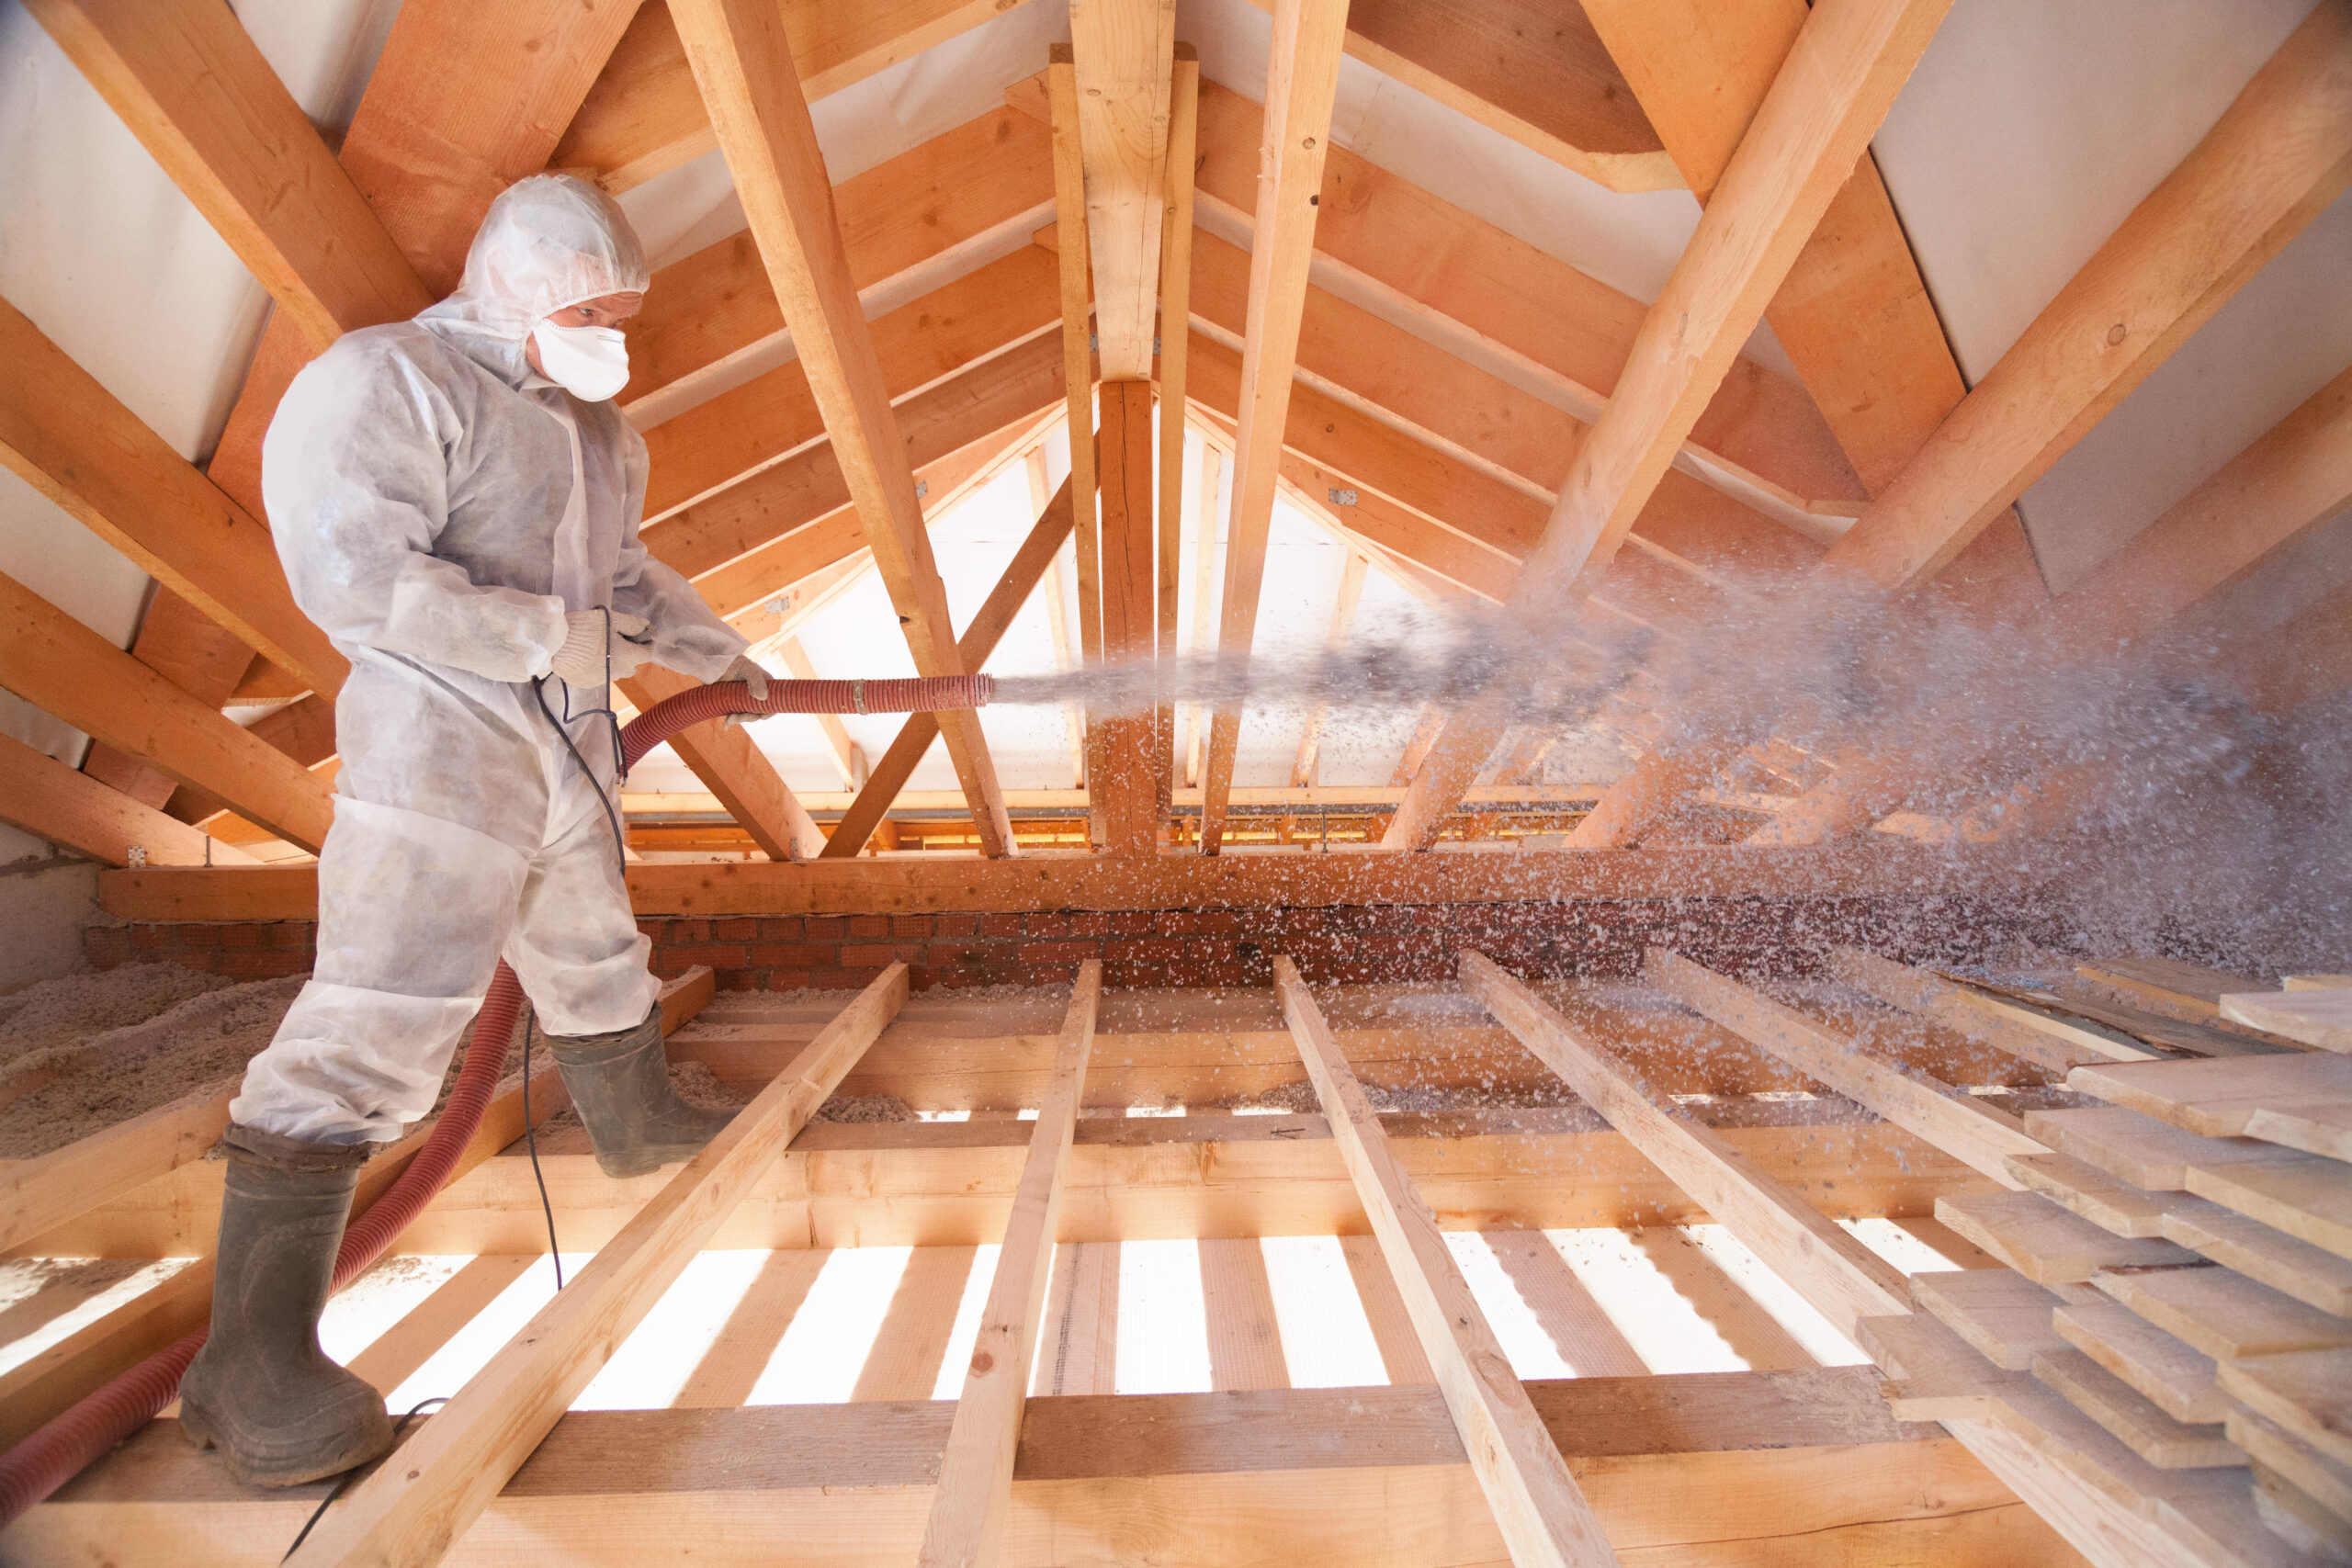 Insulation professional in protective suit spraying foam insulation in an attic